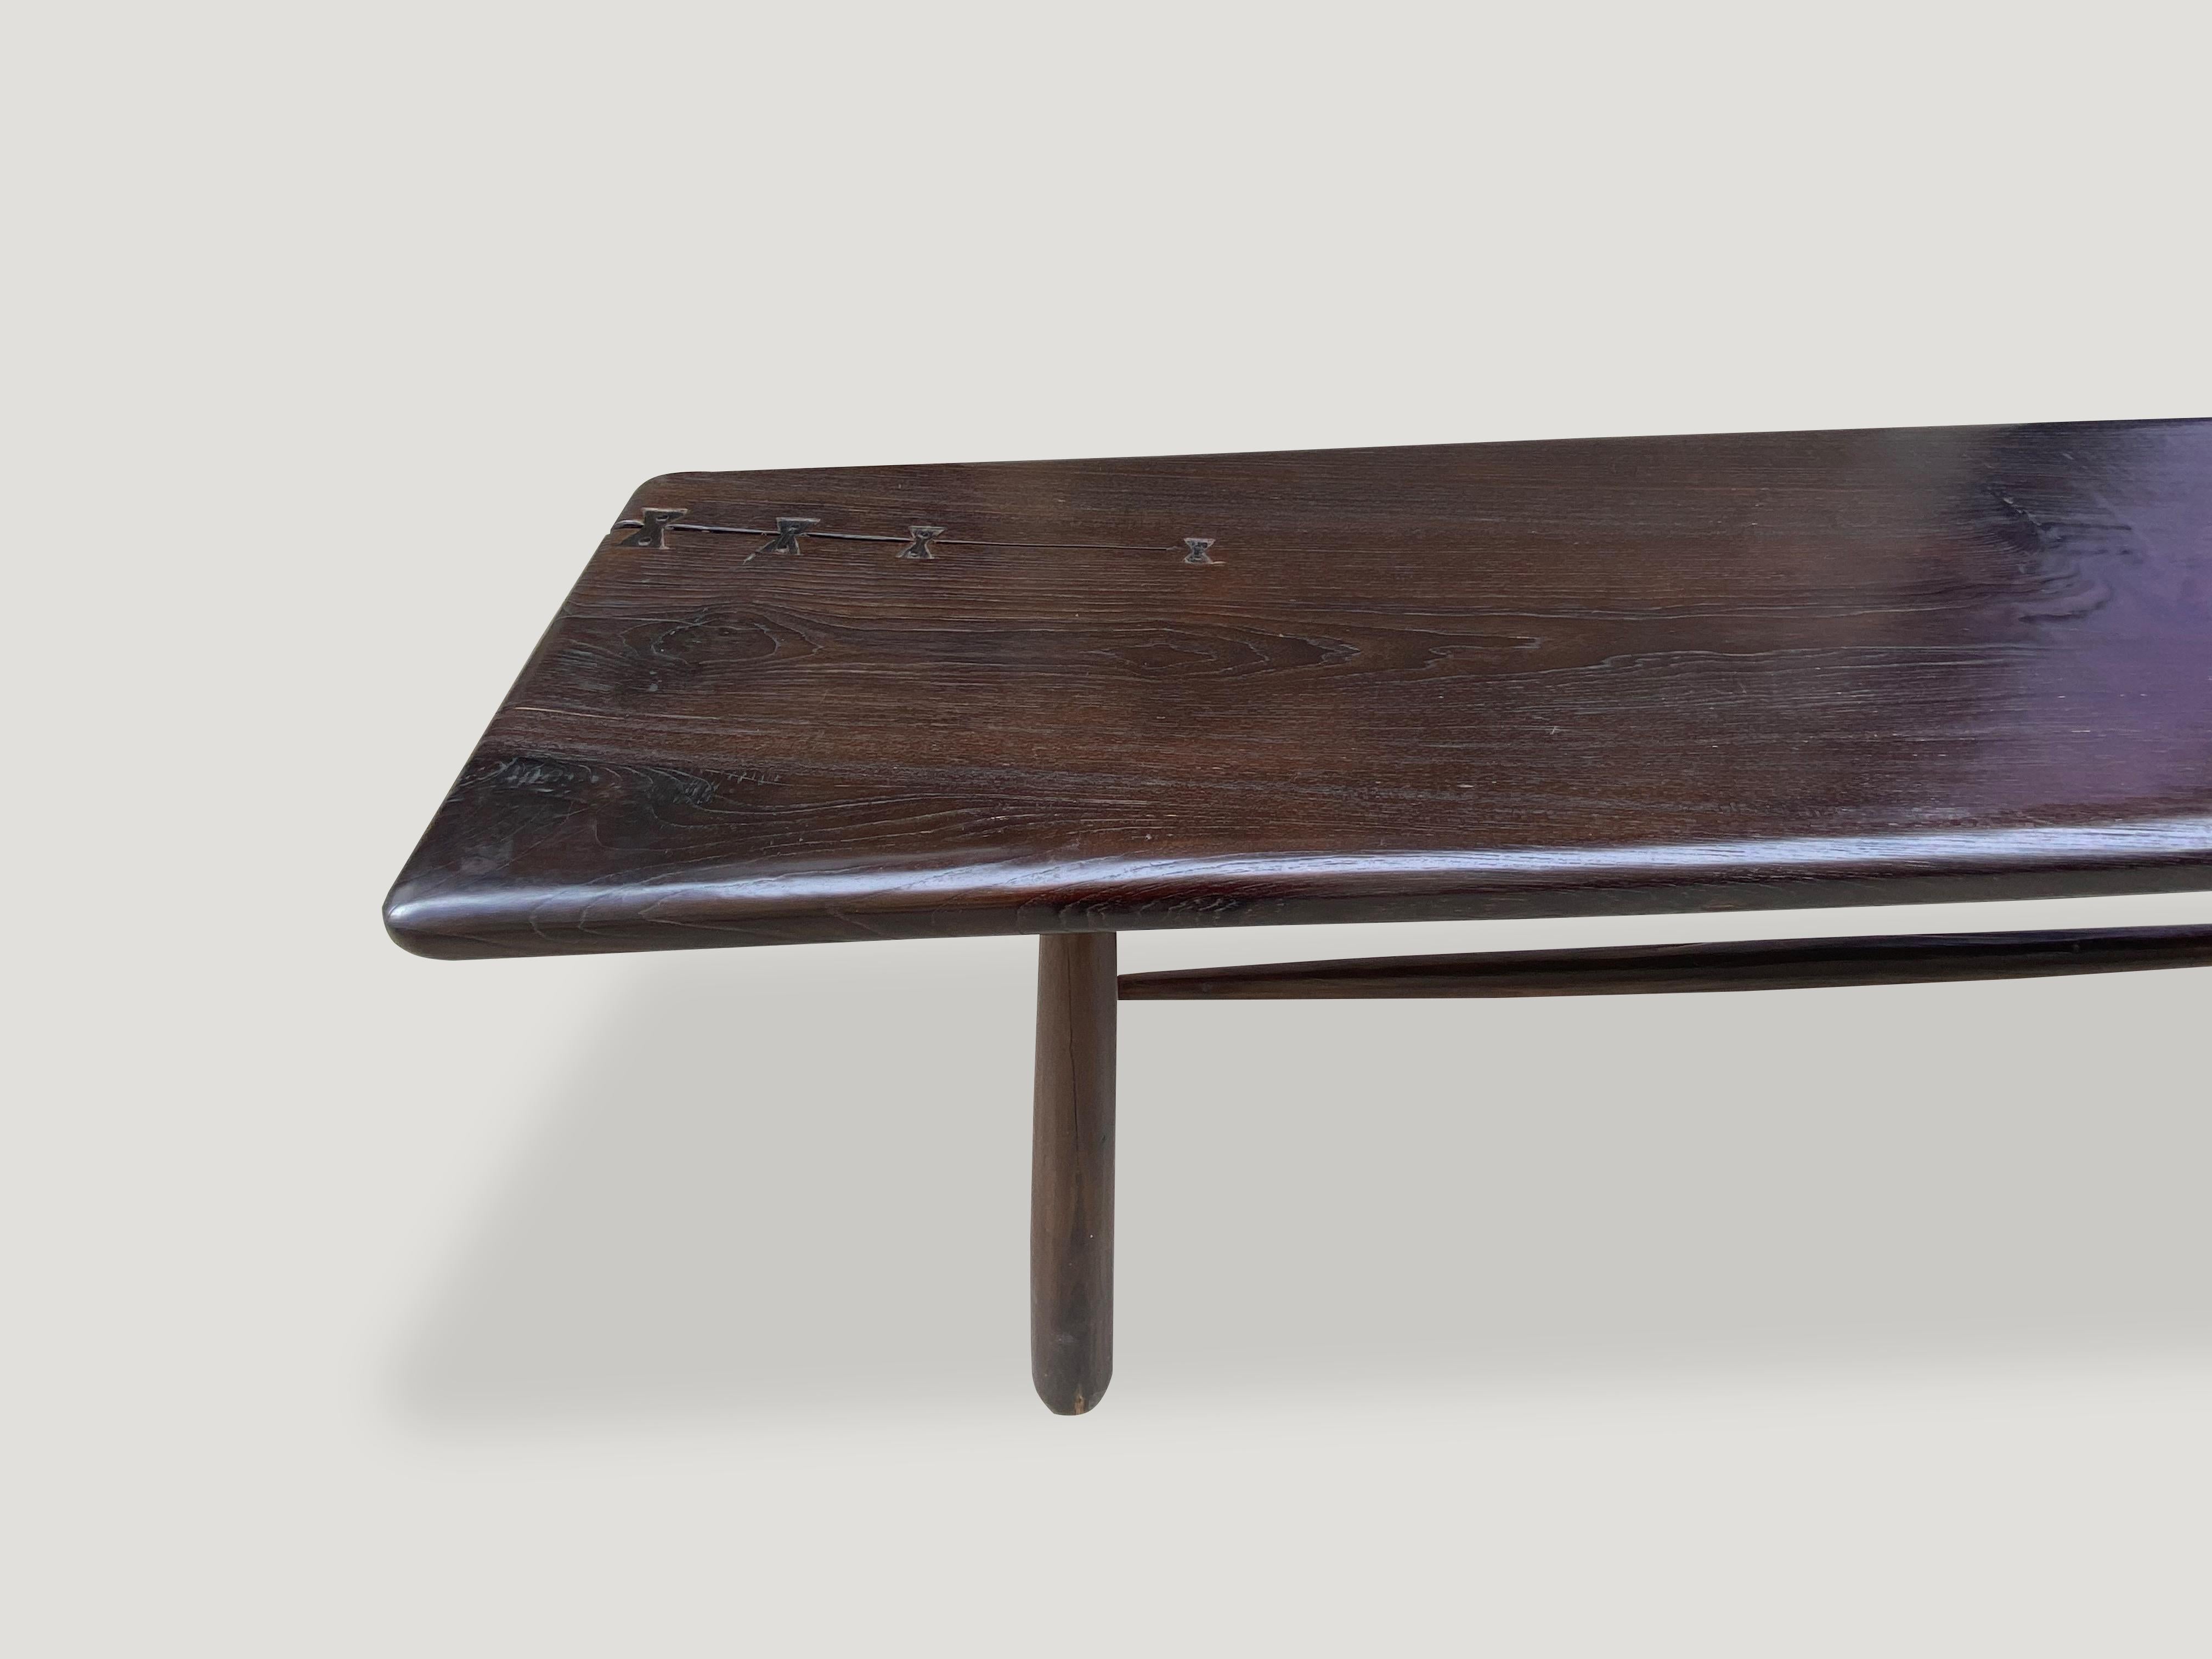 Andrianna Shamaris Midcentury Couture Espresso Stained Teak Wood Console Table For Sale 3